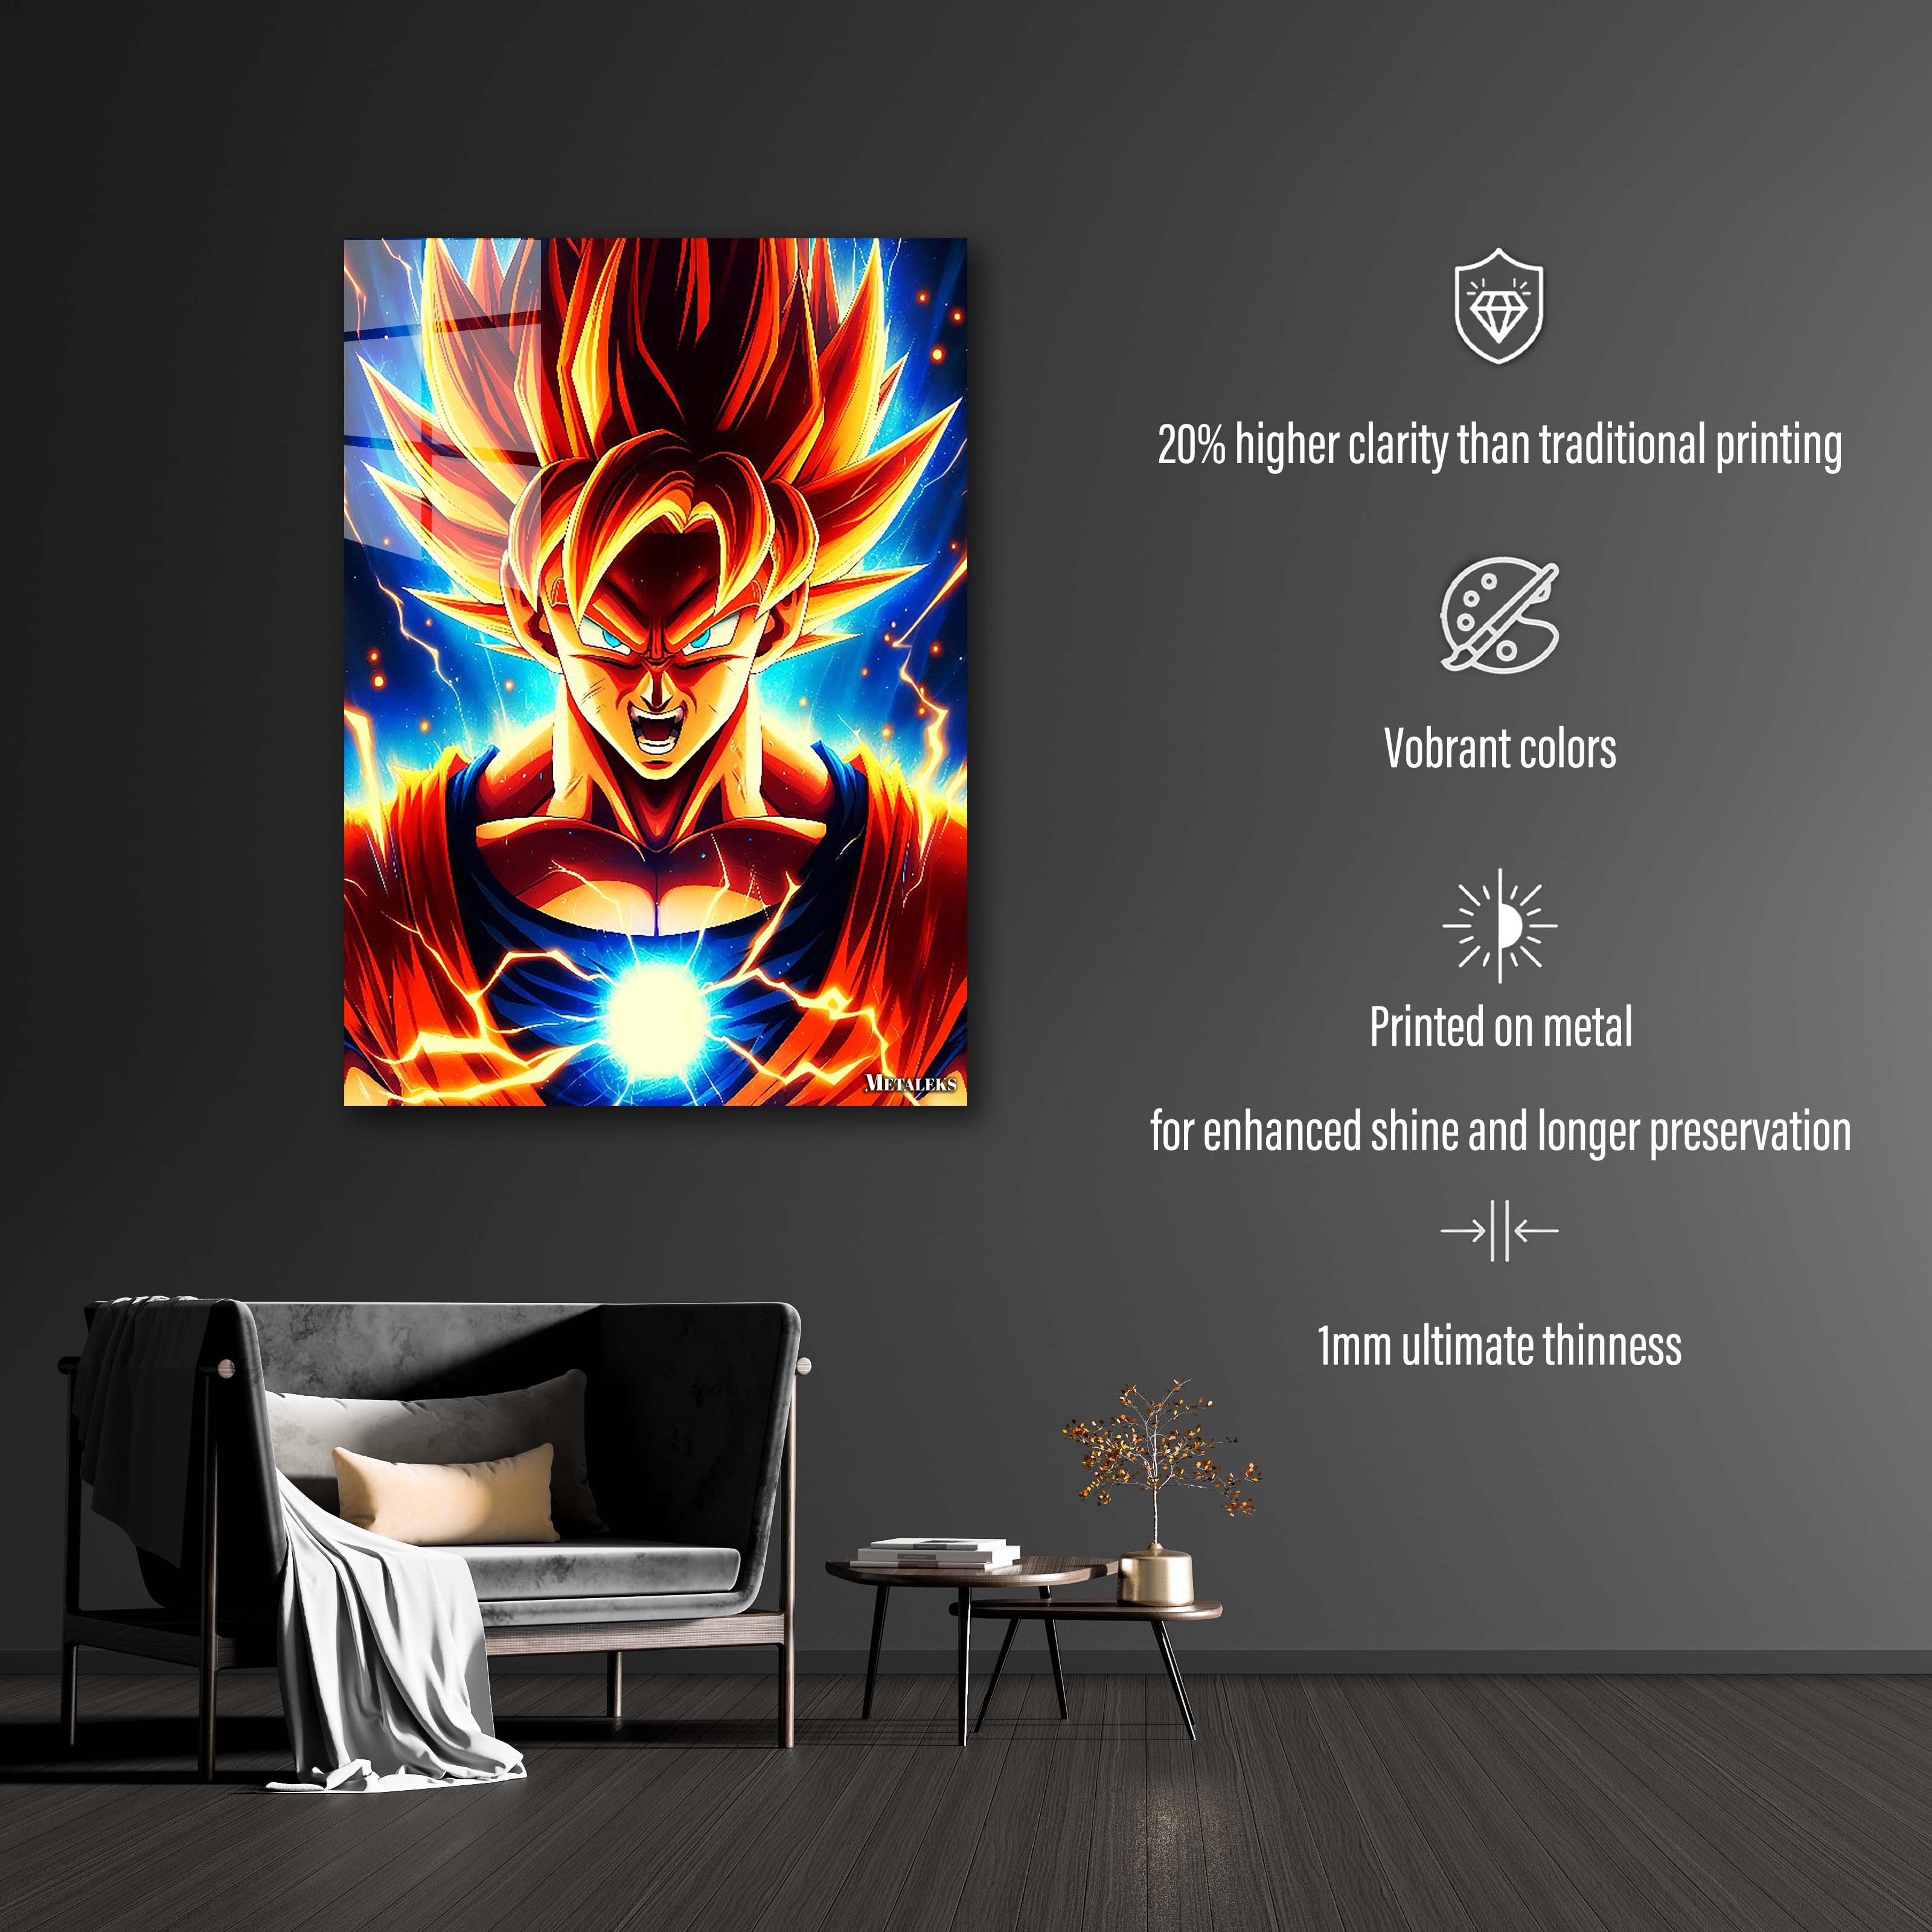 Goku Face-designed by @Boogets